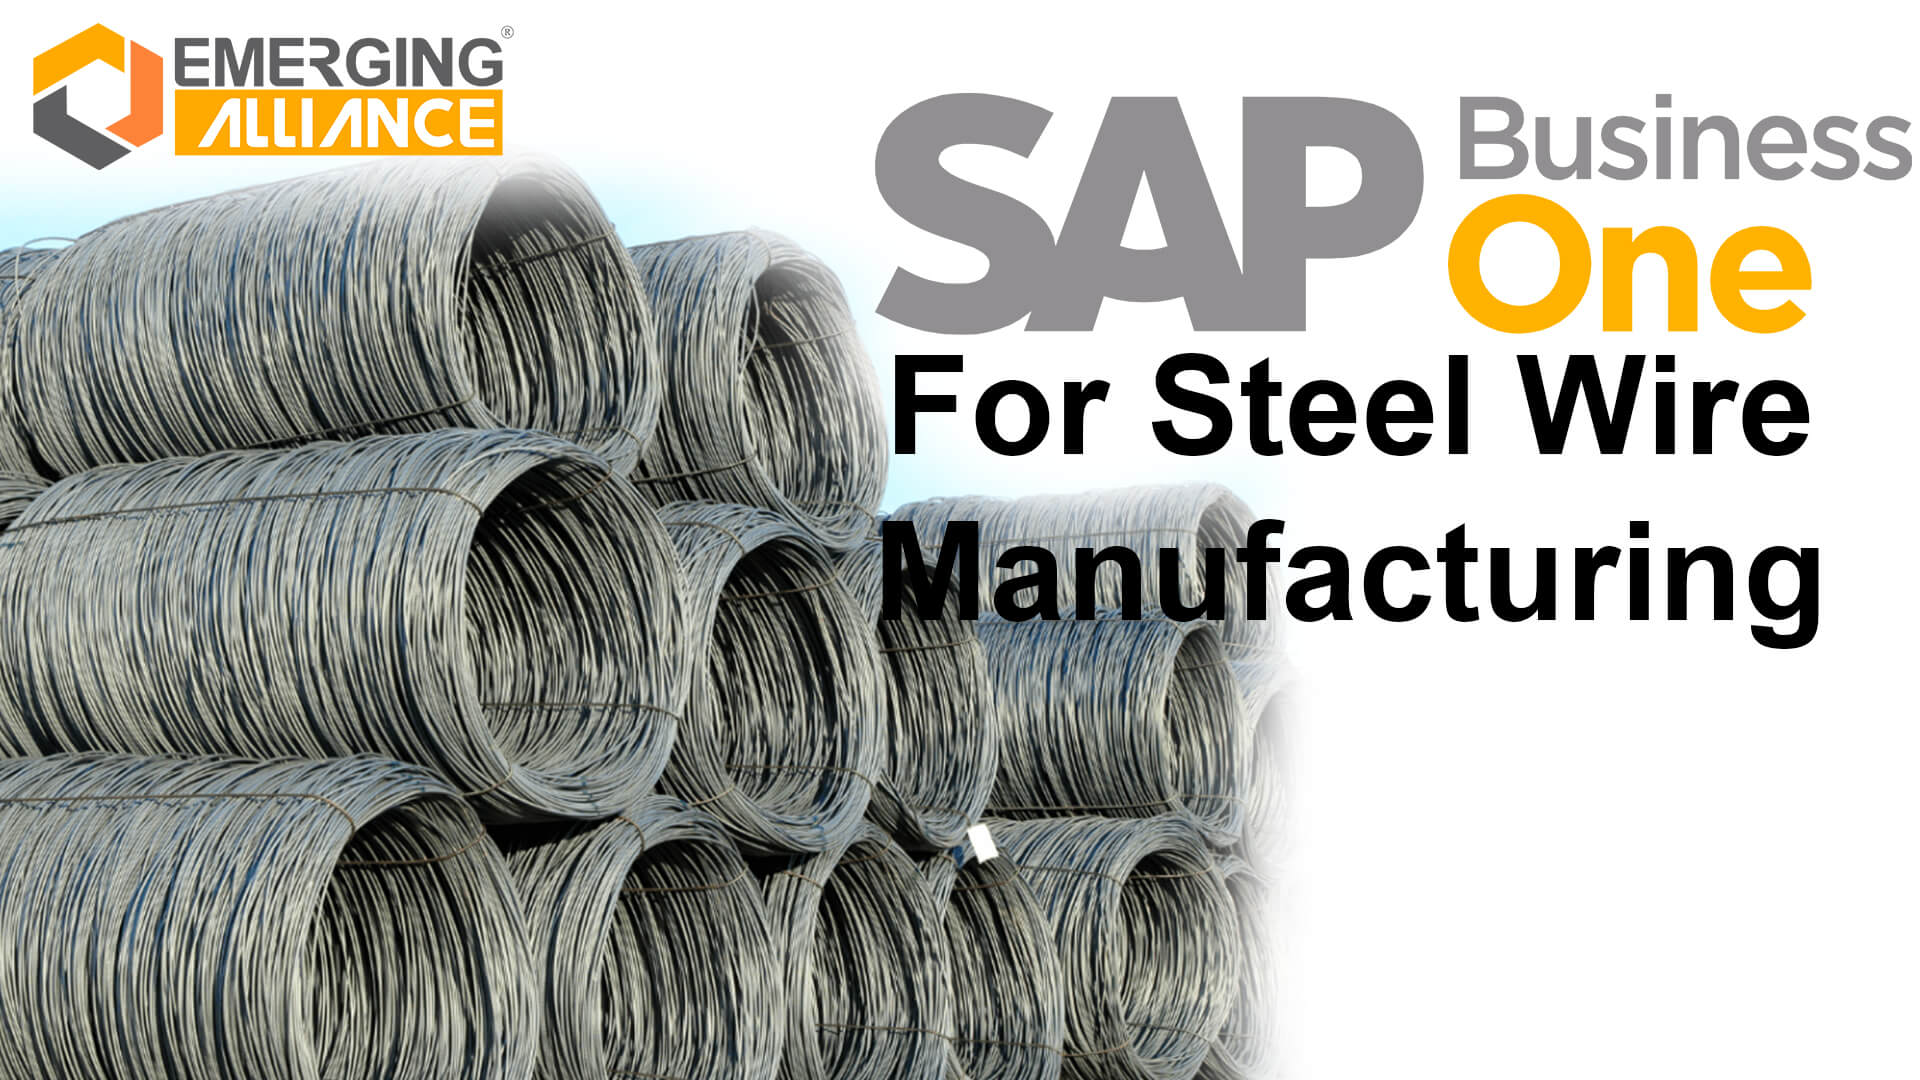 sap business one for steel wire manufacturing